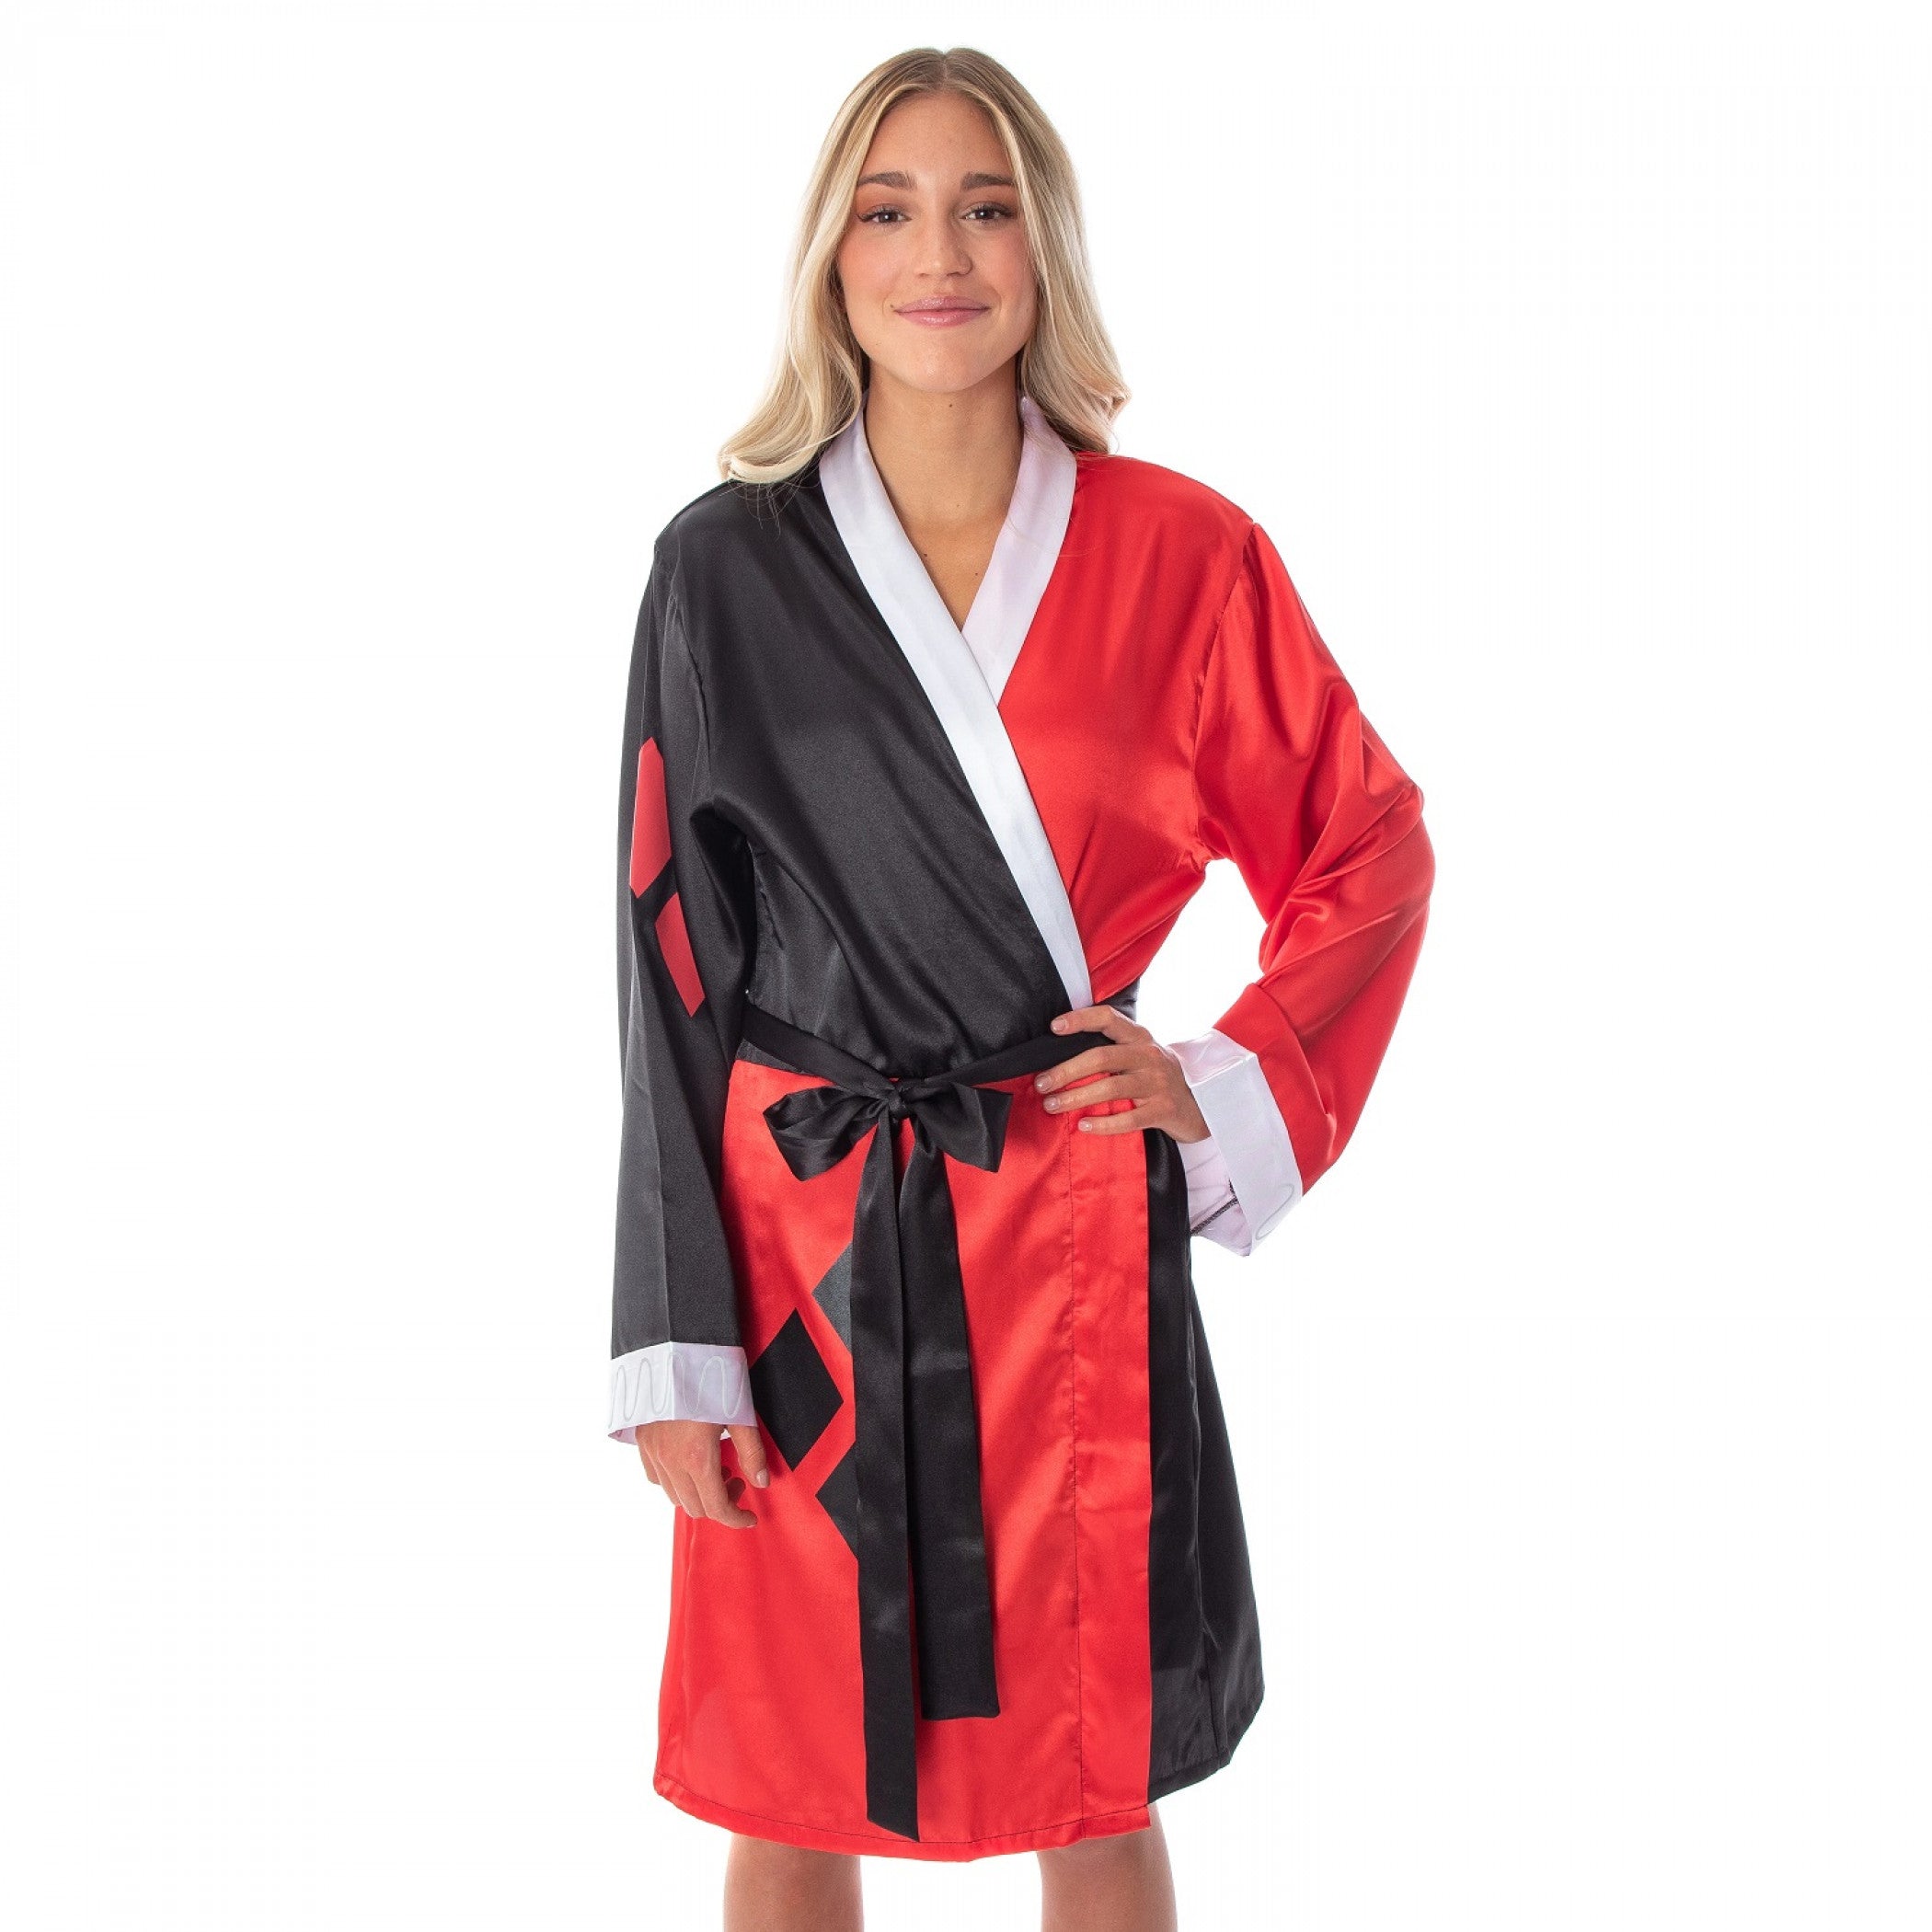 title:DC Comics Harley Quinn Costume Silky Satin Robe;color:Red